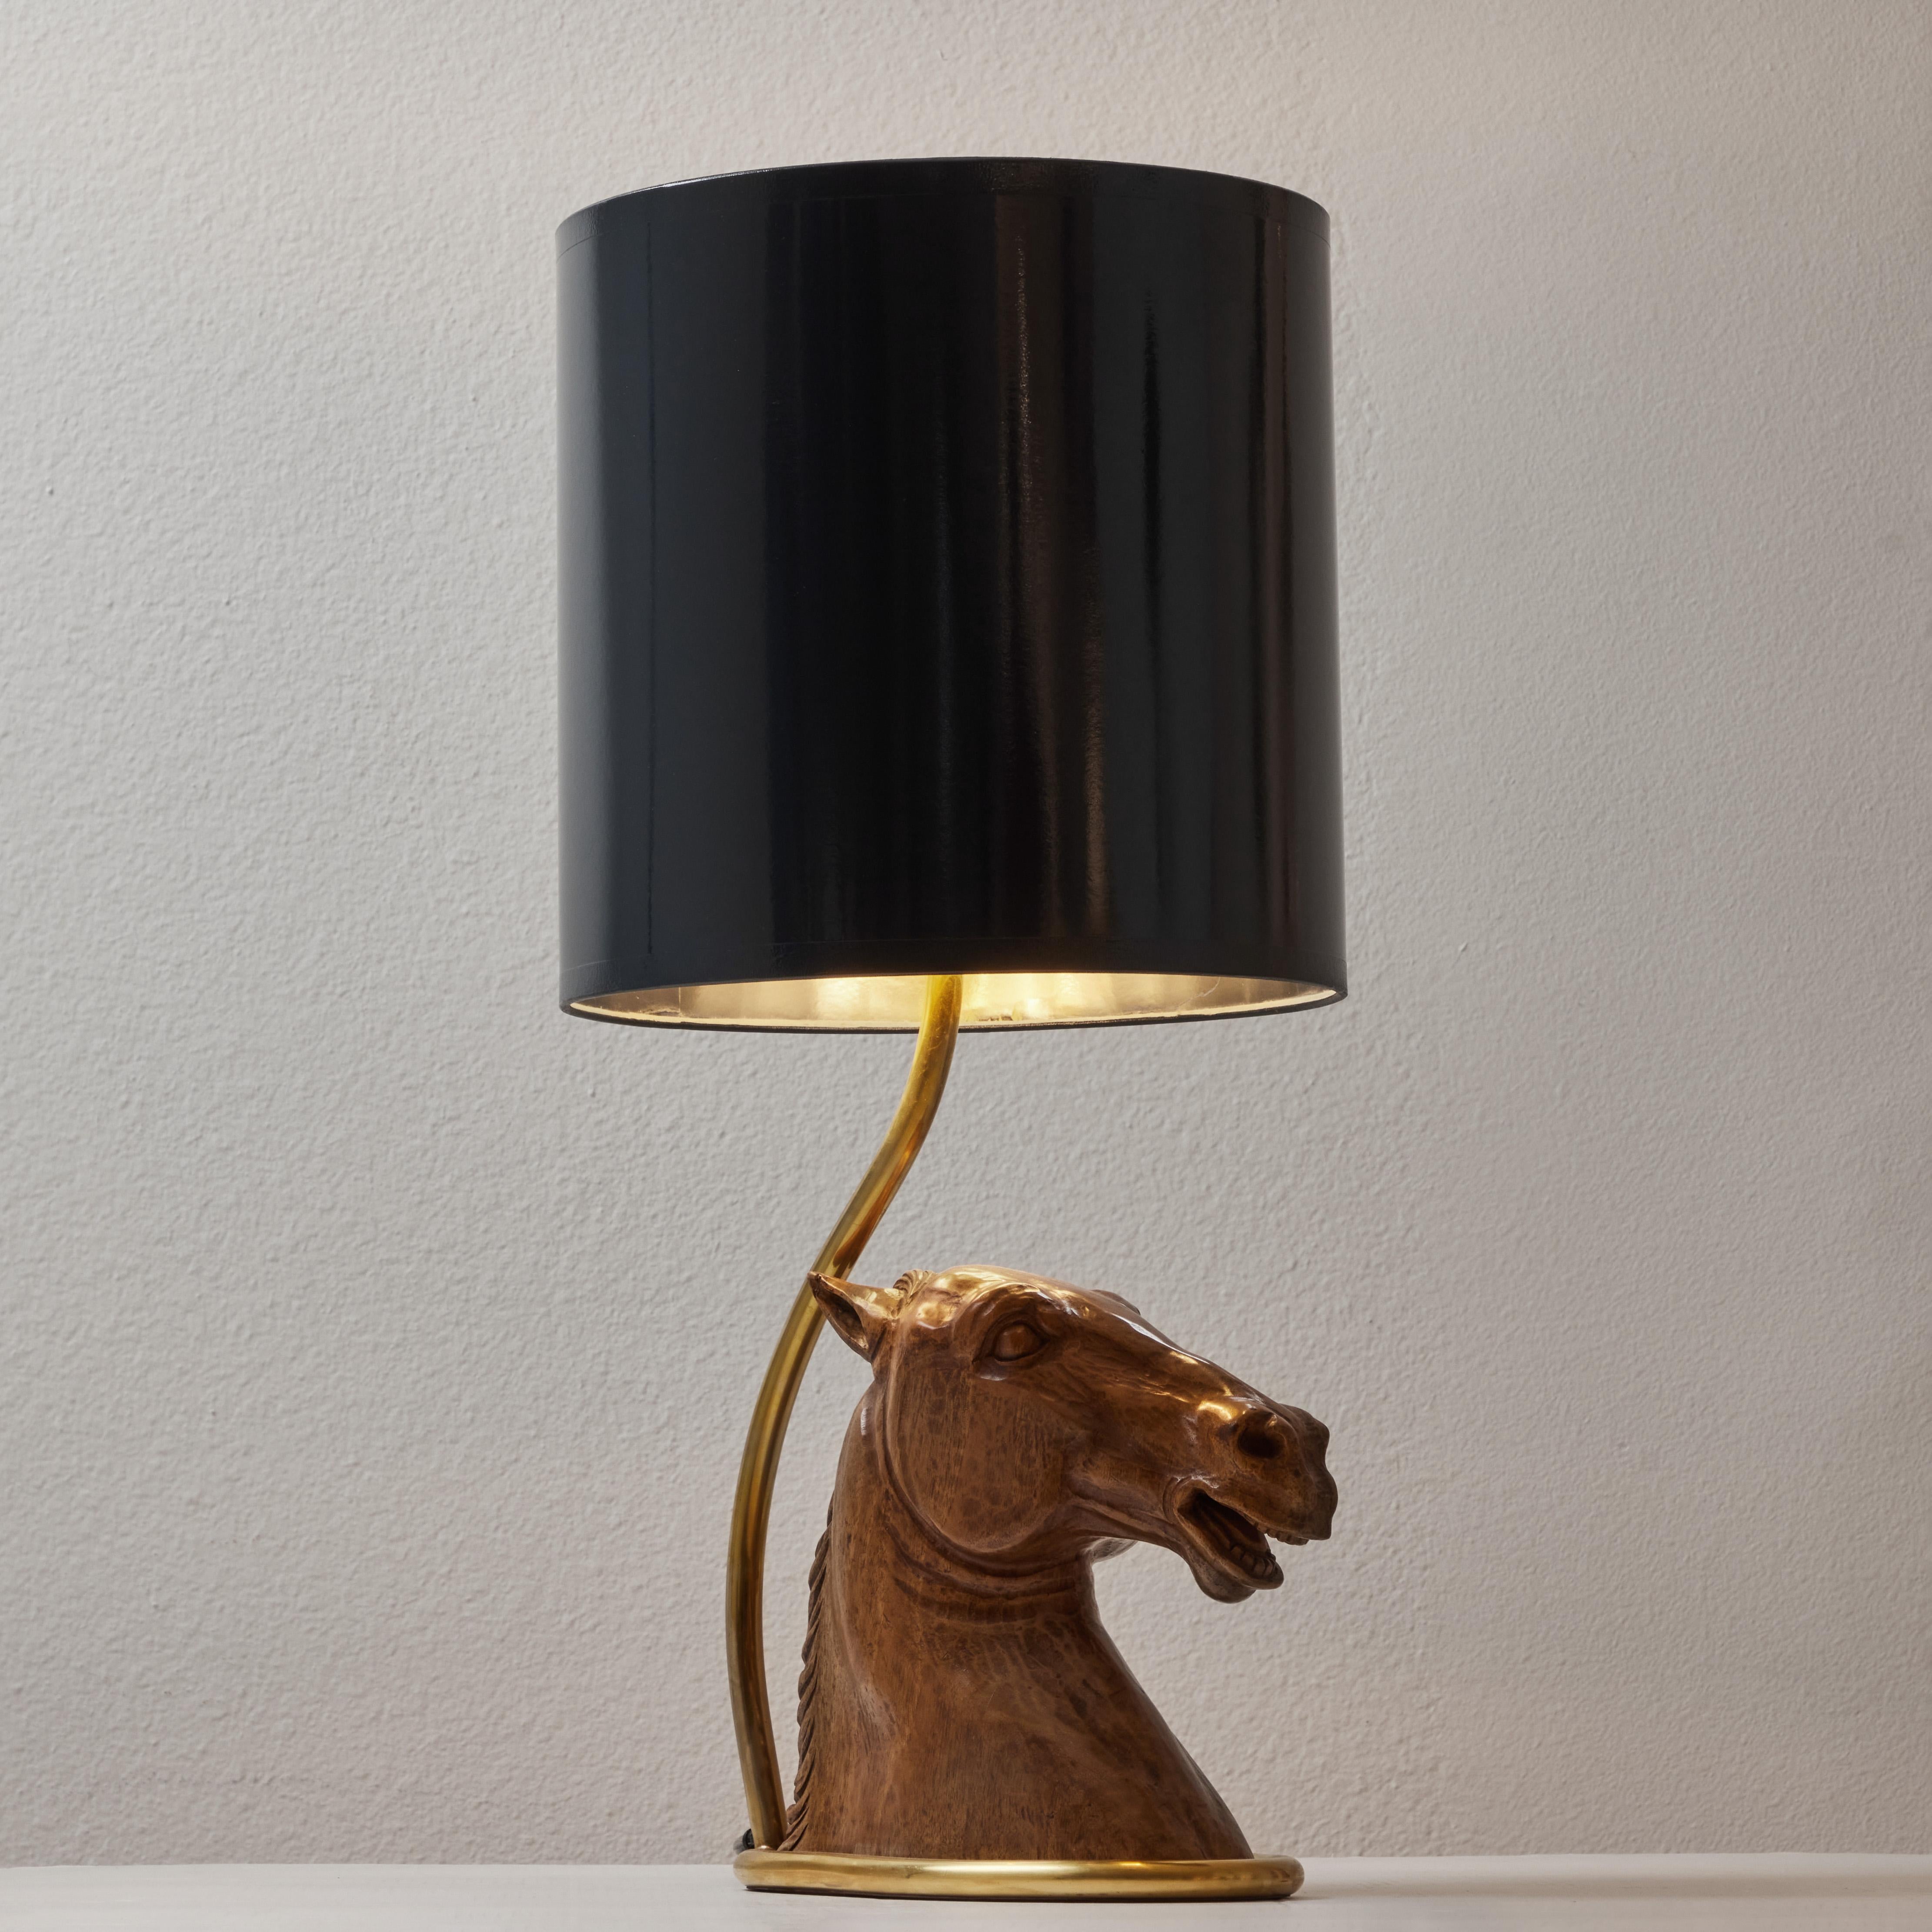 This is lamp is a wonderful example of the creativity of the House of Gucci a real powerhouse for design in the 1970s. A beautifully carved wooden horse bust that rests in a brass oval fitting most likely emulating a stirrup, the stem of the lamp is